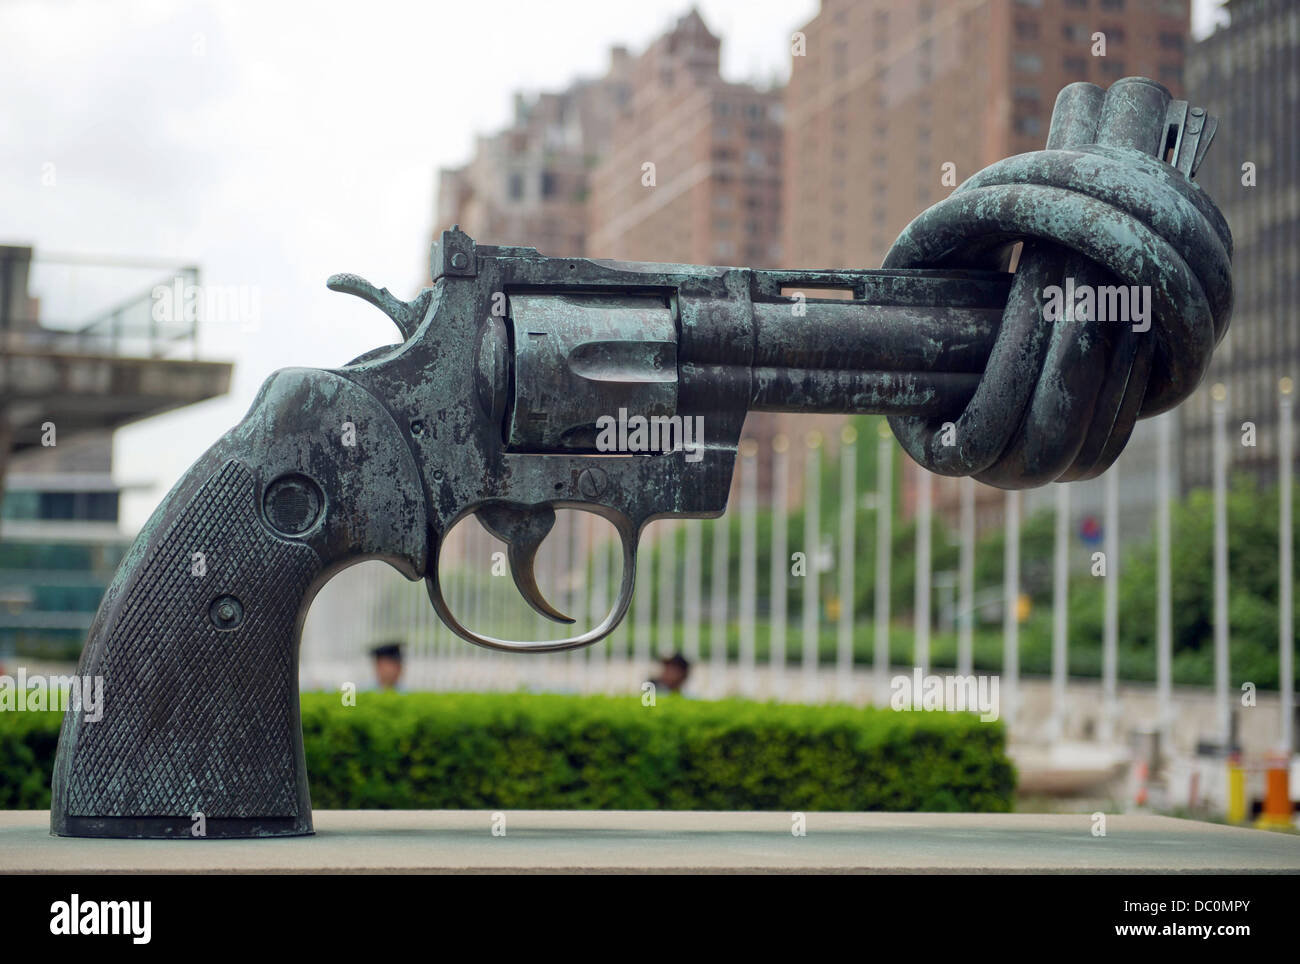 The sculpture 'Non Violence' also known as 'The Knotted Gun' by Swedish artist Carl Fredrik Reutersward sits outside of the United Nations (UN) in New York City, New York, USA, 03 June 2013. The scultpure was a gift from Luxembourg to the UN in 1988. Photo: TIM BRAKEMEIER Stock Photo